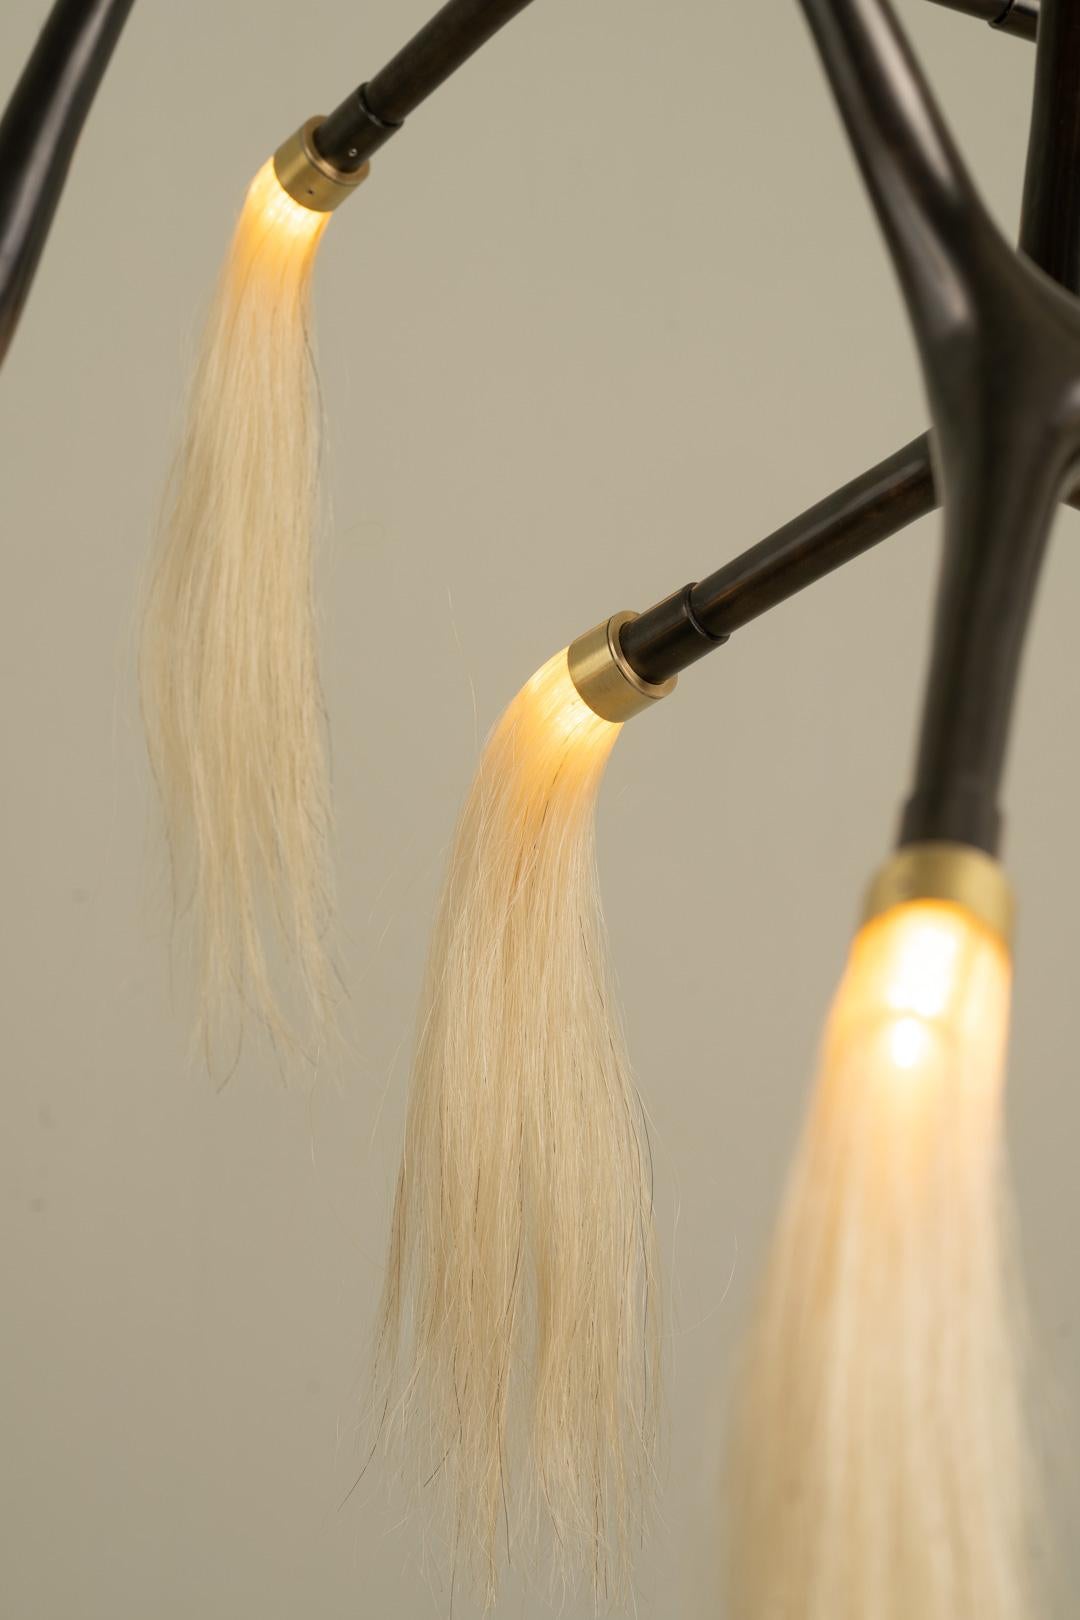 Mexican Organic Modern Light Fixture Lost-Wax Bronze Vintage Finish Horsehair Tassels For Sale